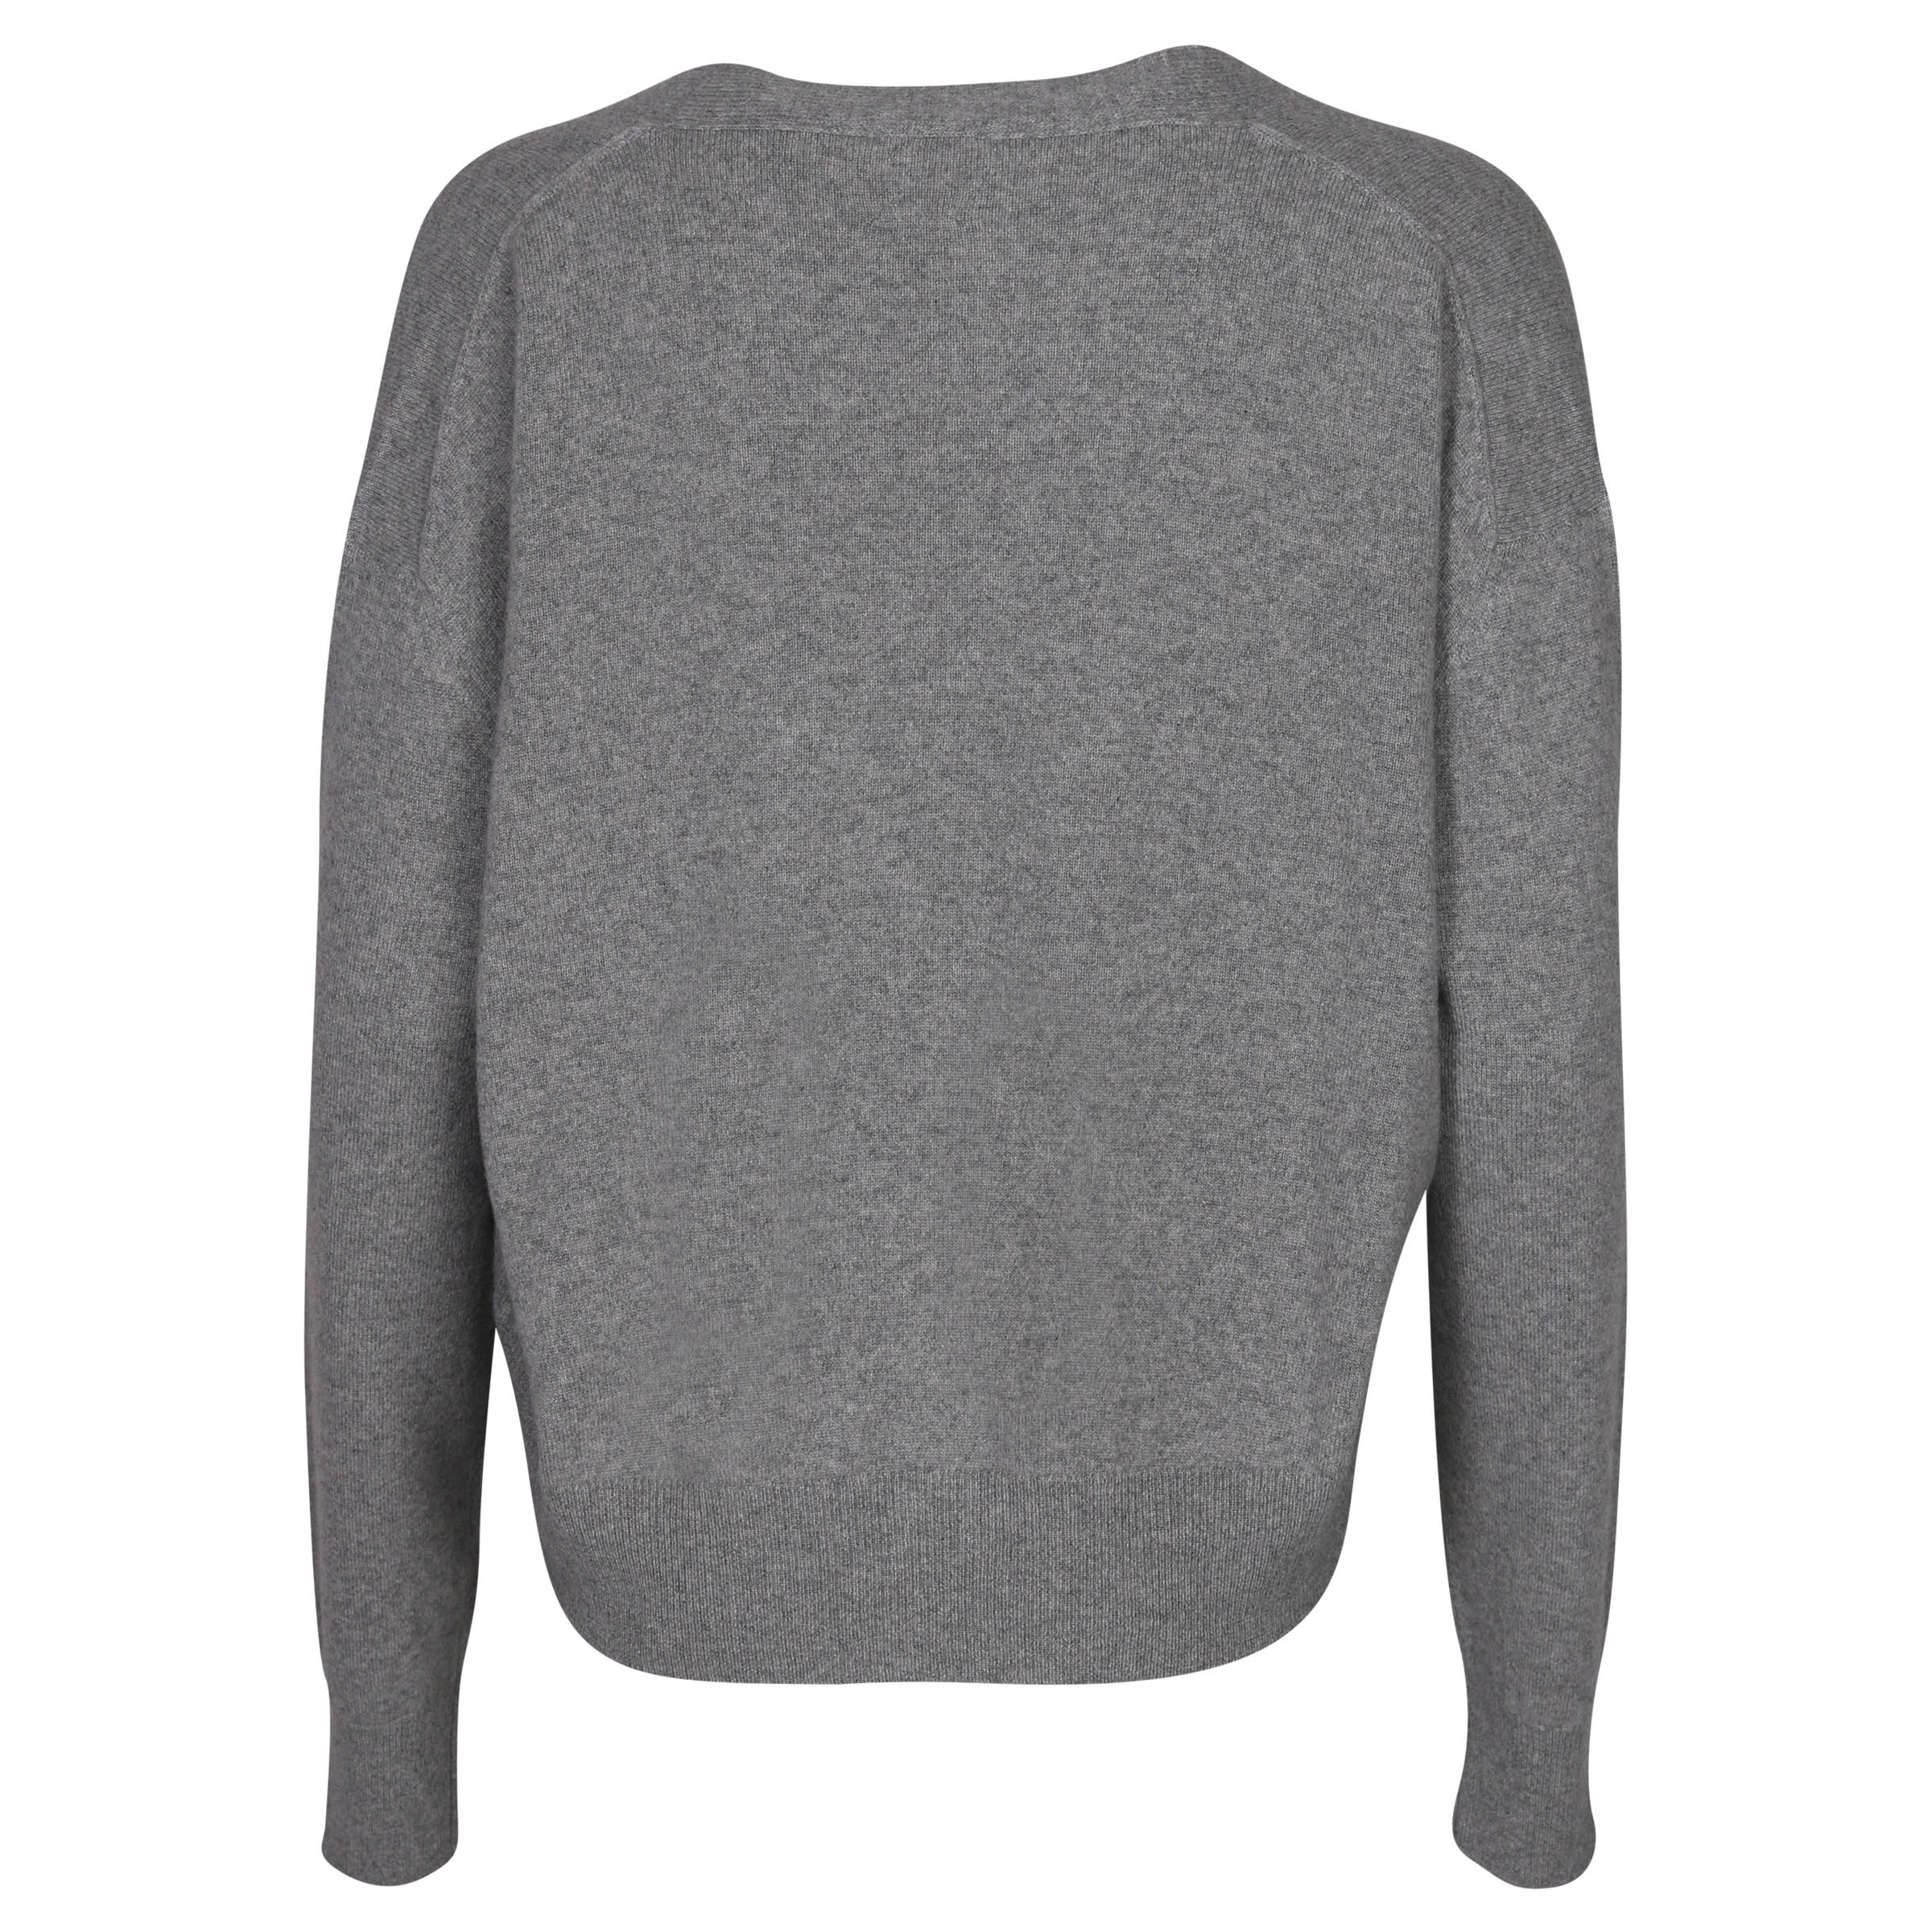 Phiili Recycled Cashmere Cardigan in Grey S/M